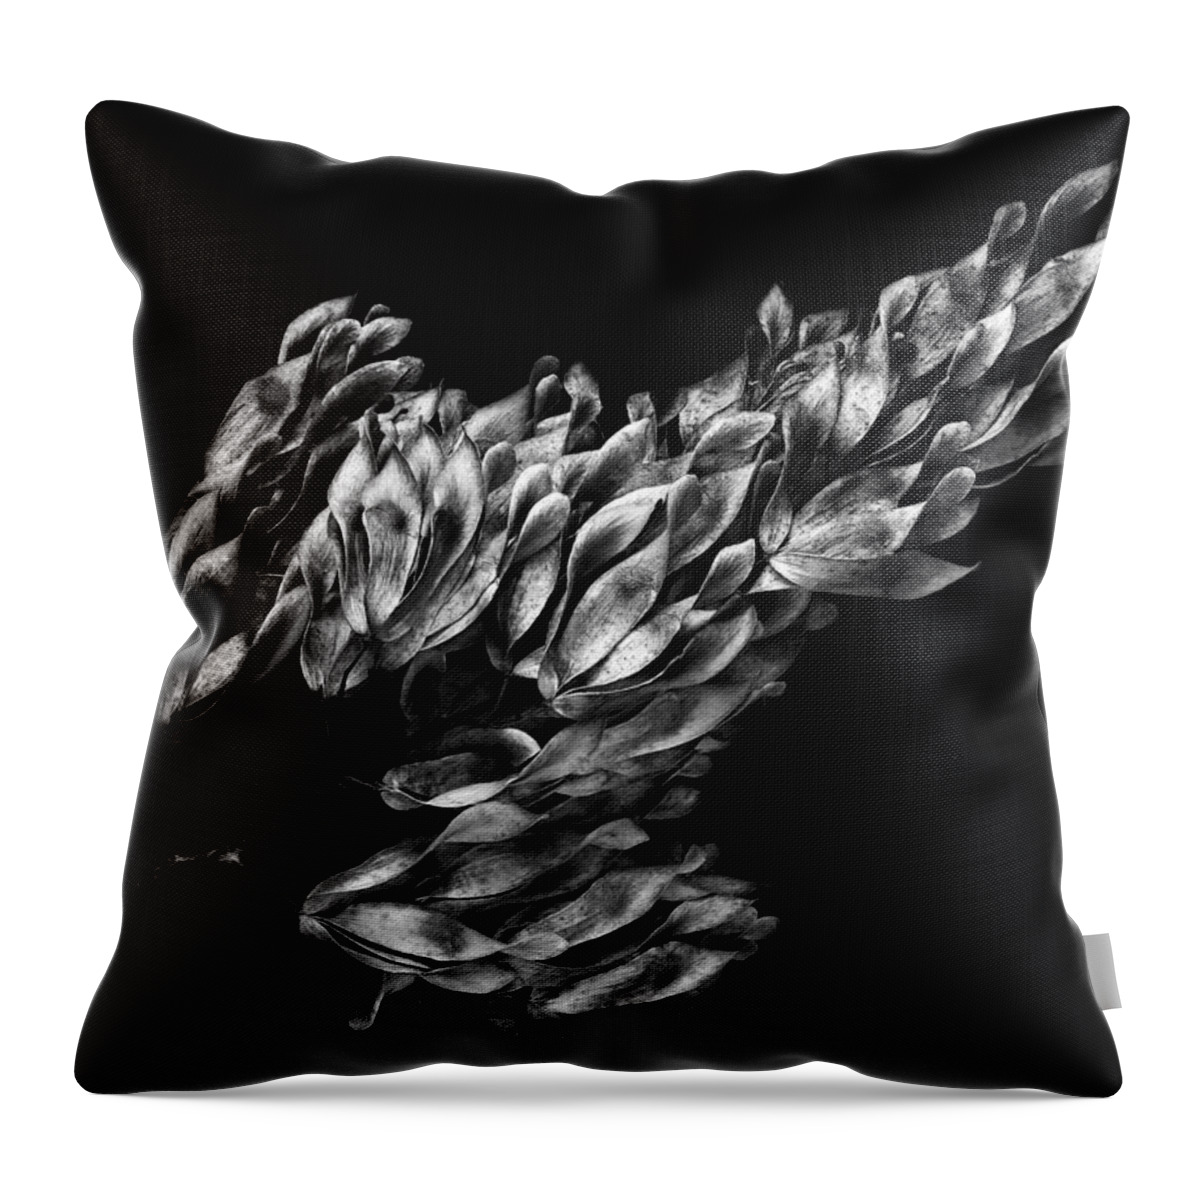 Seeds Throw Pillow featuring the photograph Large Seed Pod Cluster by Robert Woodward